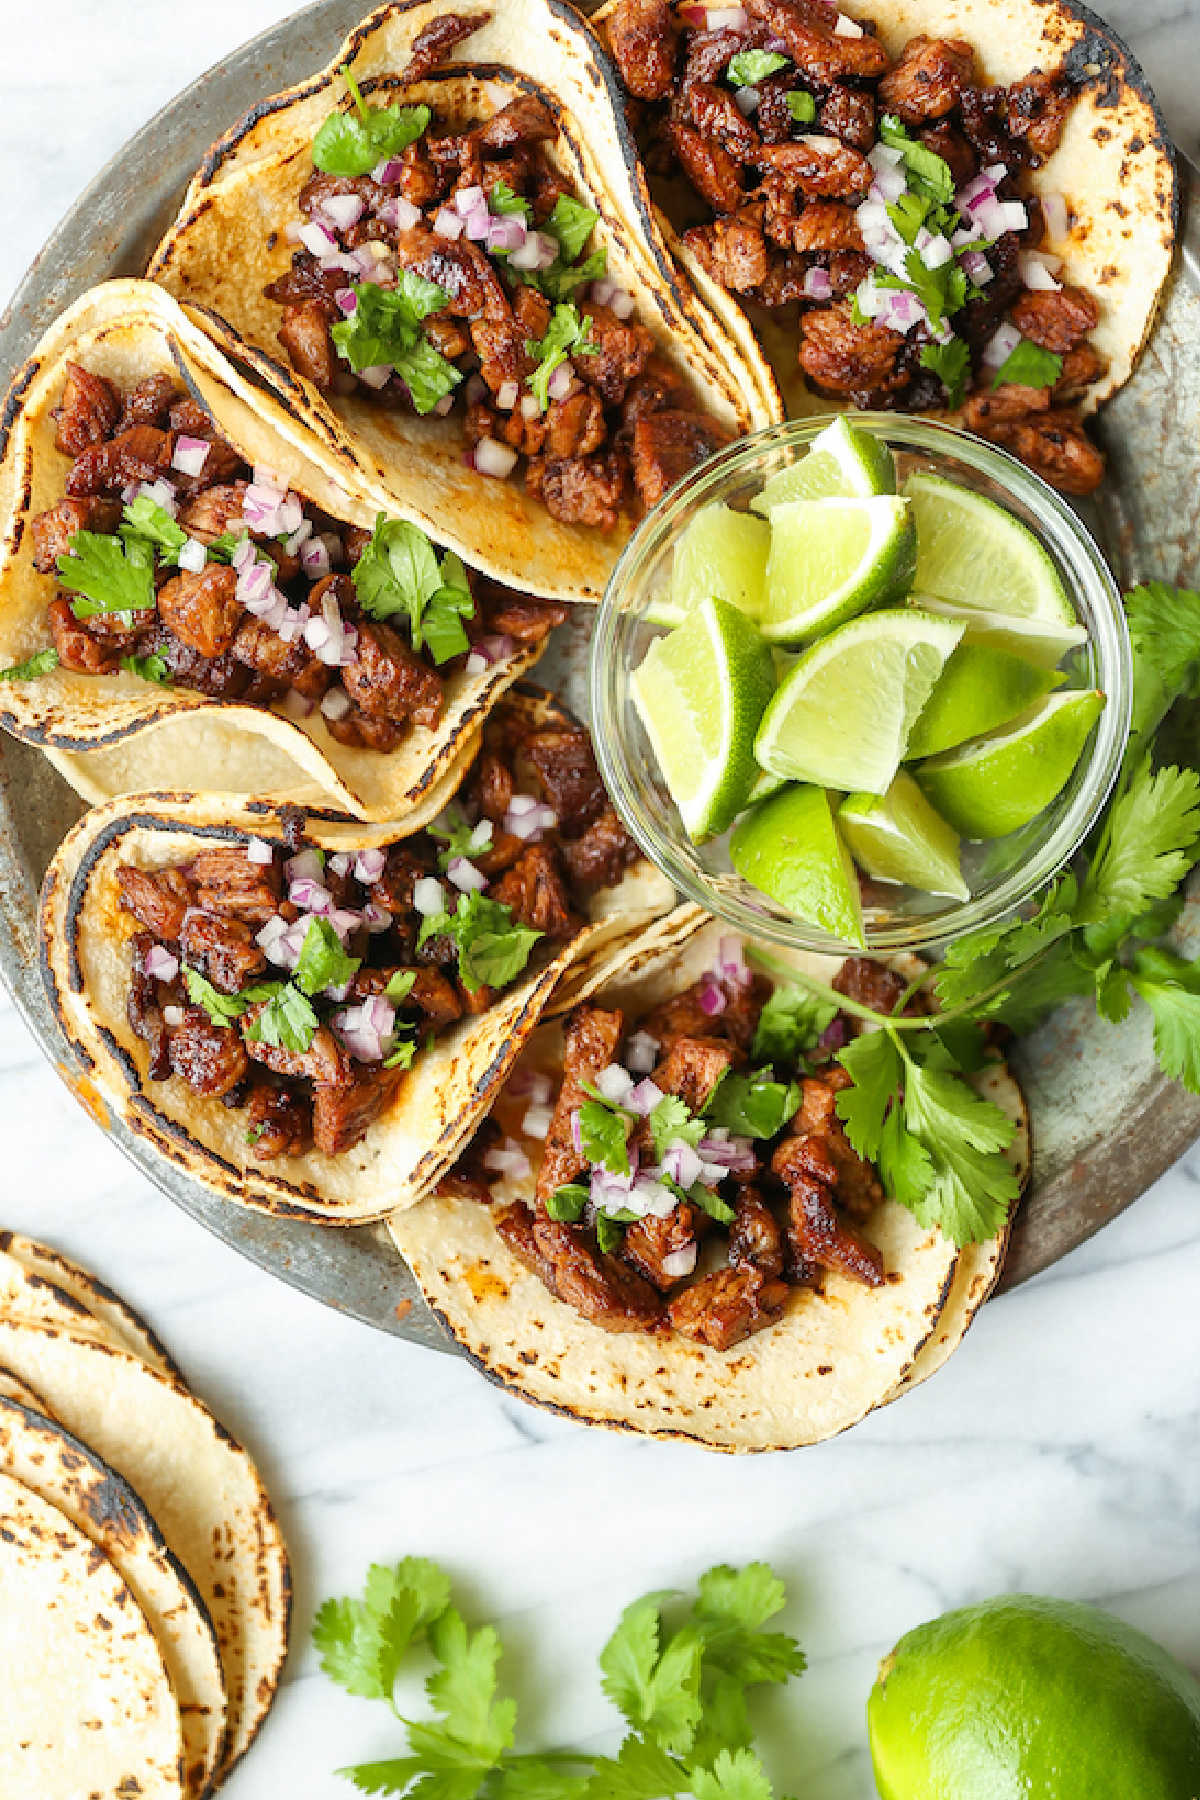 Taco Bar with Affordable Fillings - a tasty and cheap party food idea